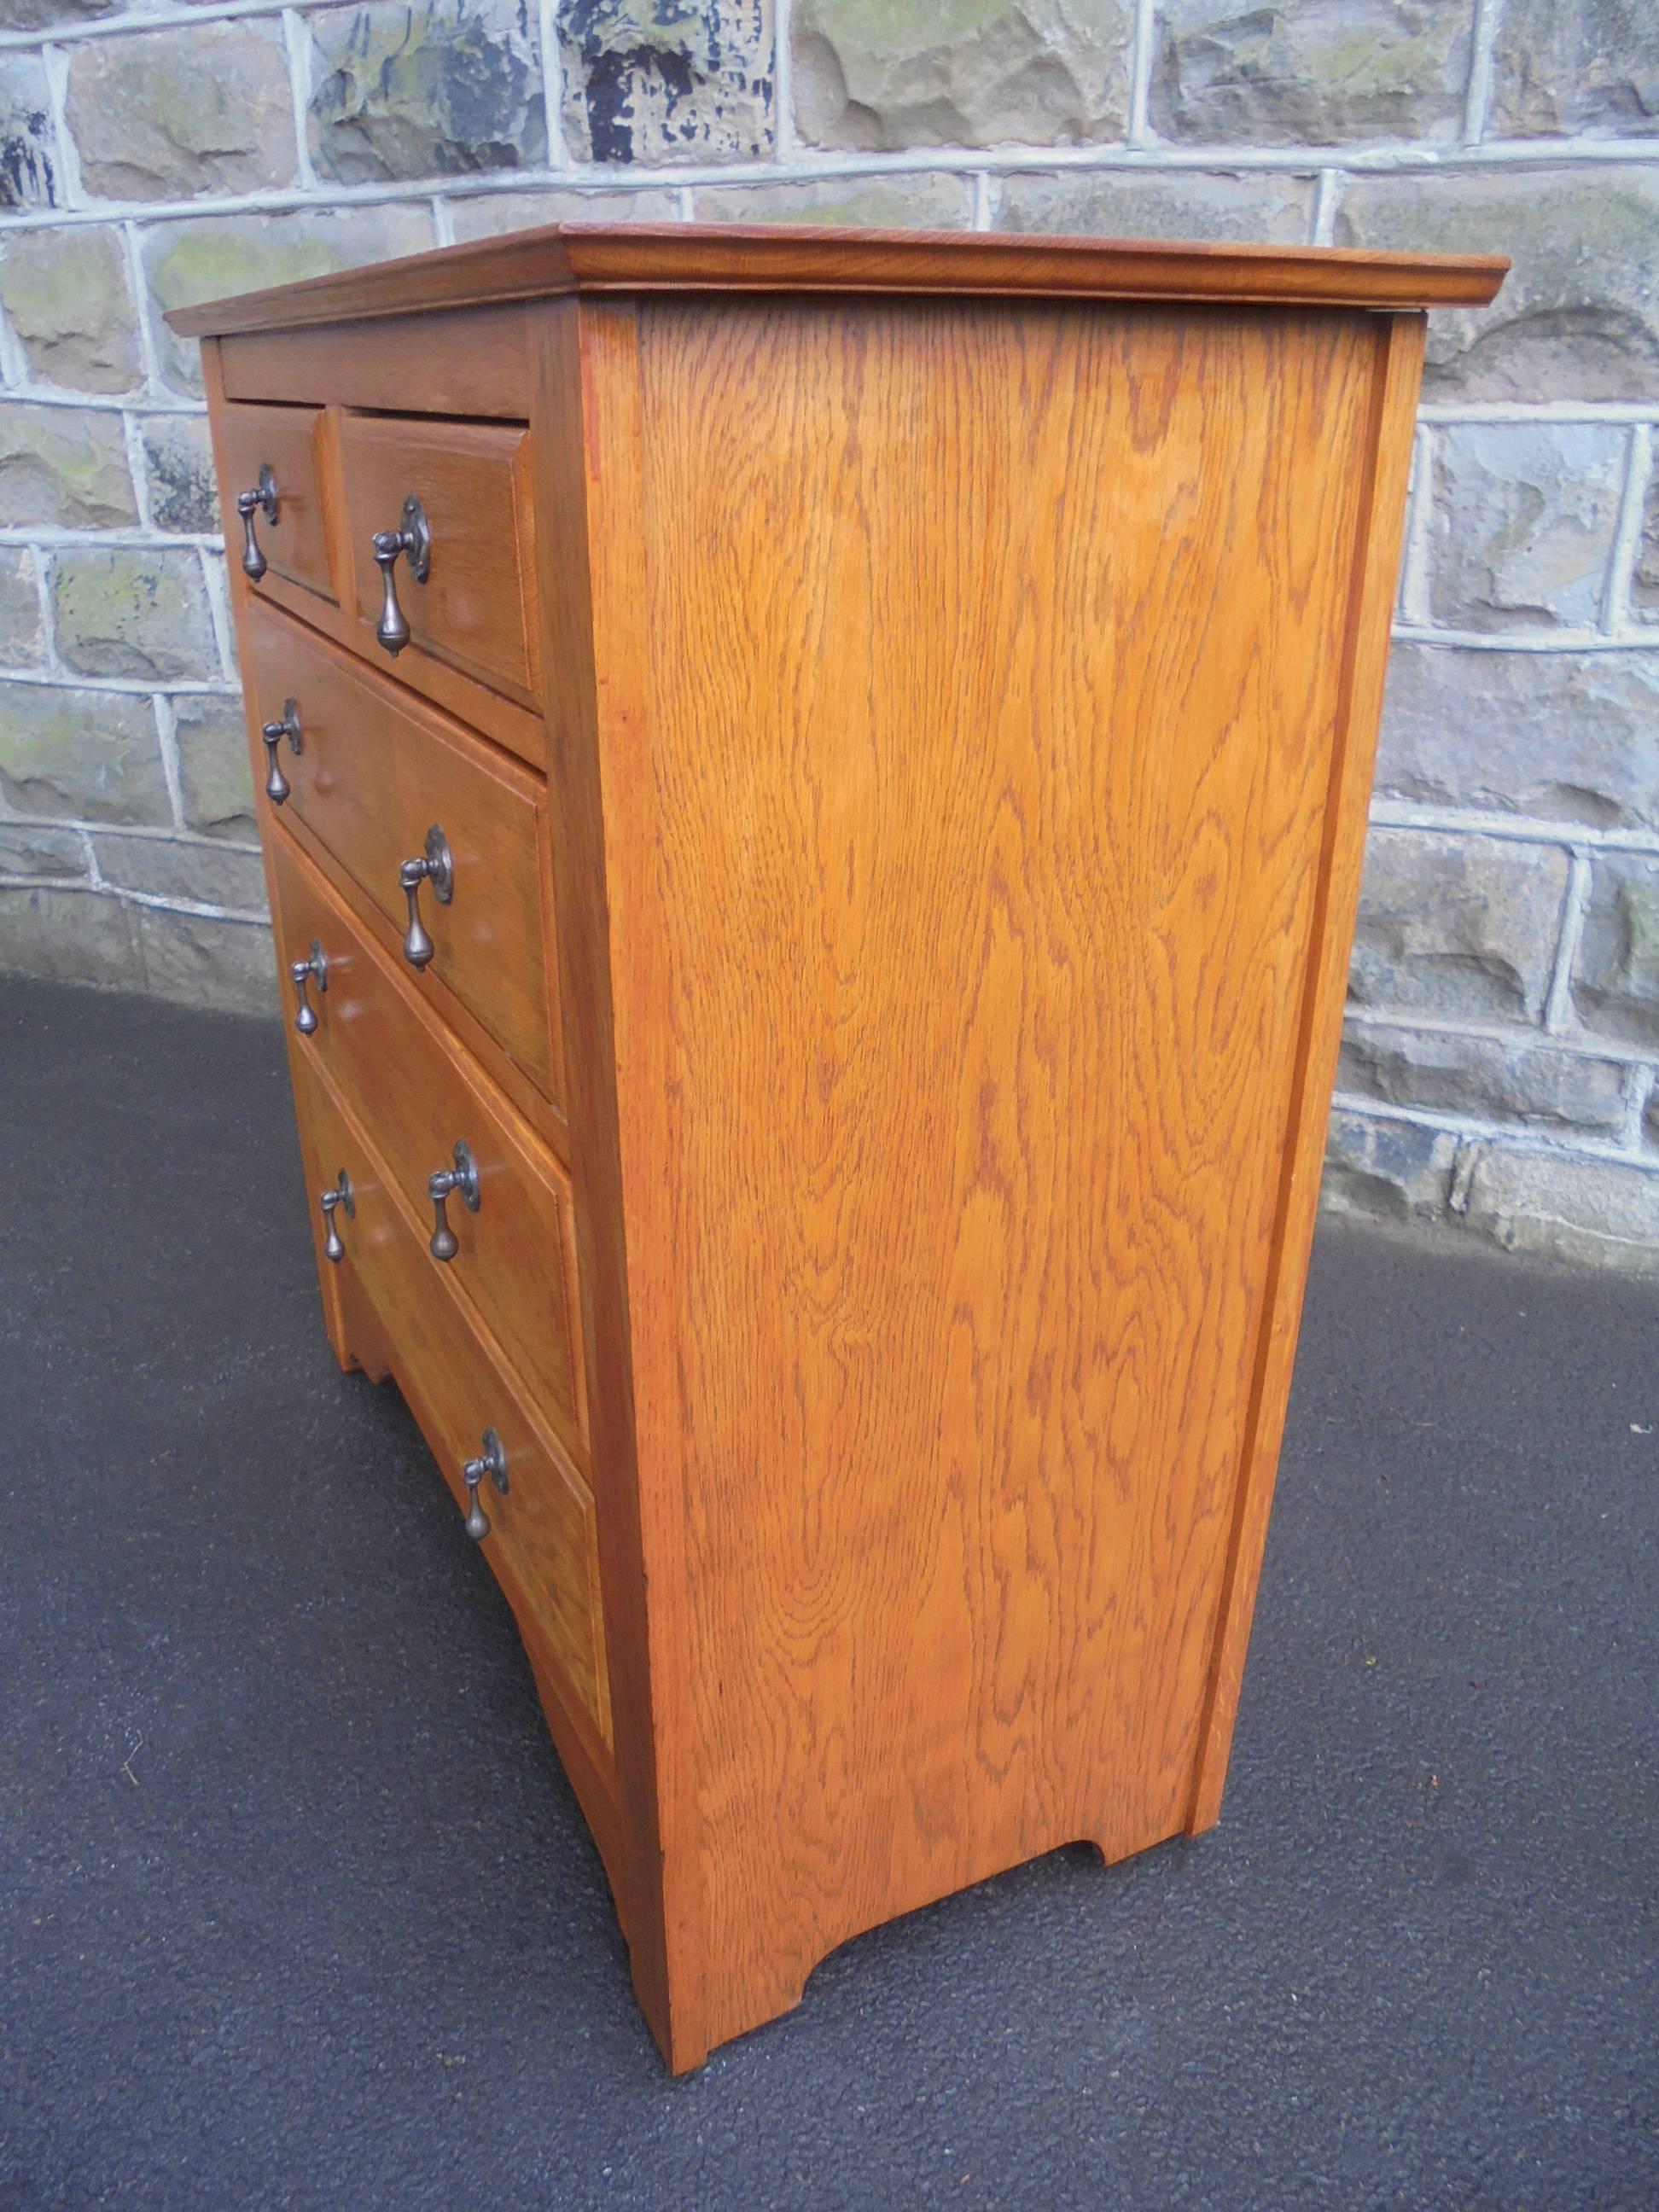 Offered for sale is this antique Arts & Crafts oak chest of draws.

Made from solid oak which is a nice light golden color. Arrangement of two smaller over three longer deeper draws, all have drop handles. All the draw linings have dovetailed